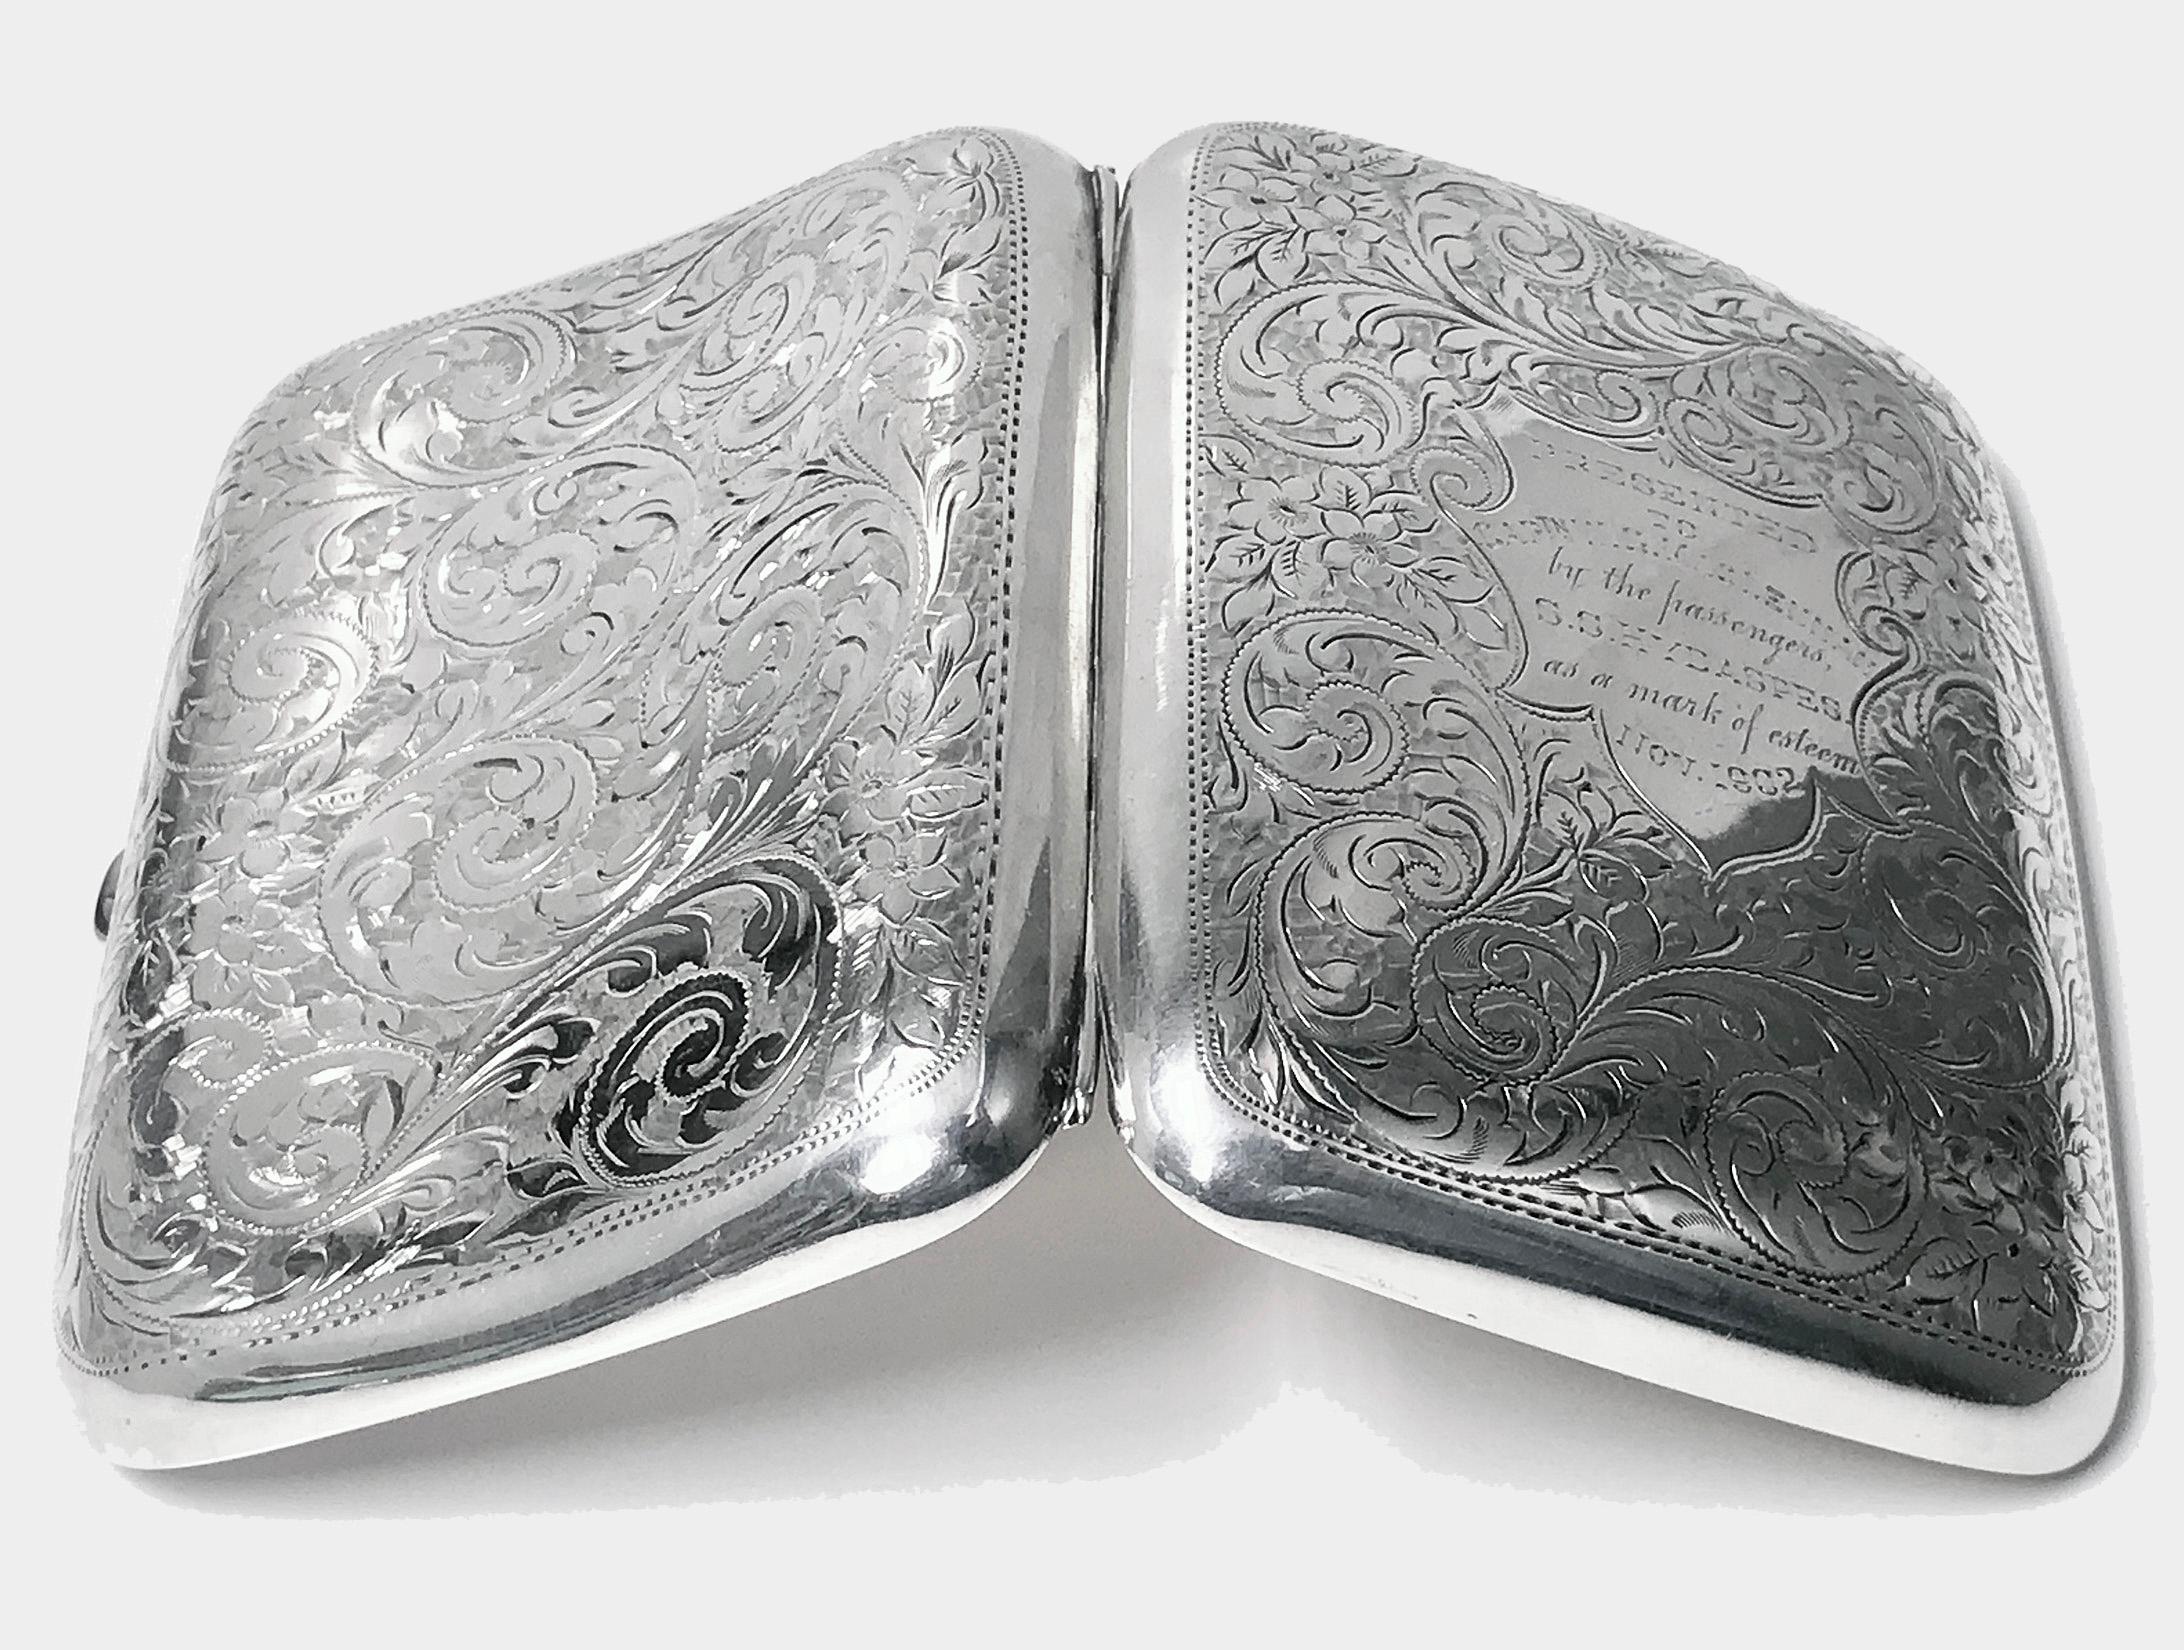 Antique sterling silver cigarette cigarillo case, Birmingham, 1901, Samuel Levi. The case of rectangular concave shape engraved foliate pinprick style decoration, central cartouche, engraved 'PRESENTED TO CAPtn W.G.MacLENNAN by the passengers